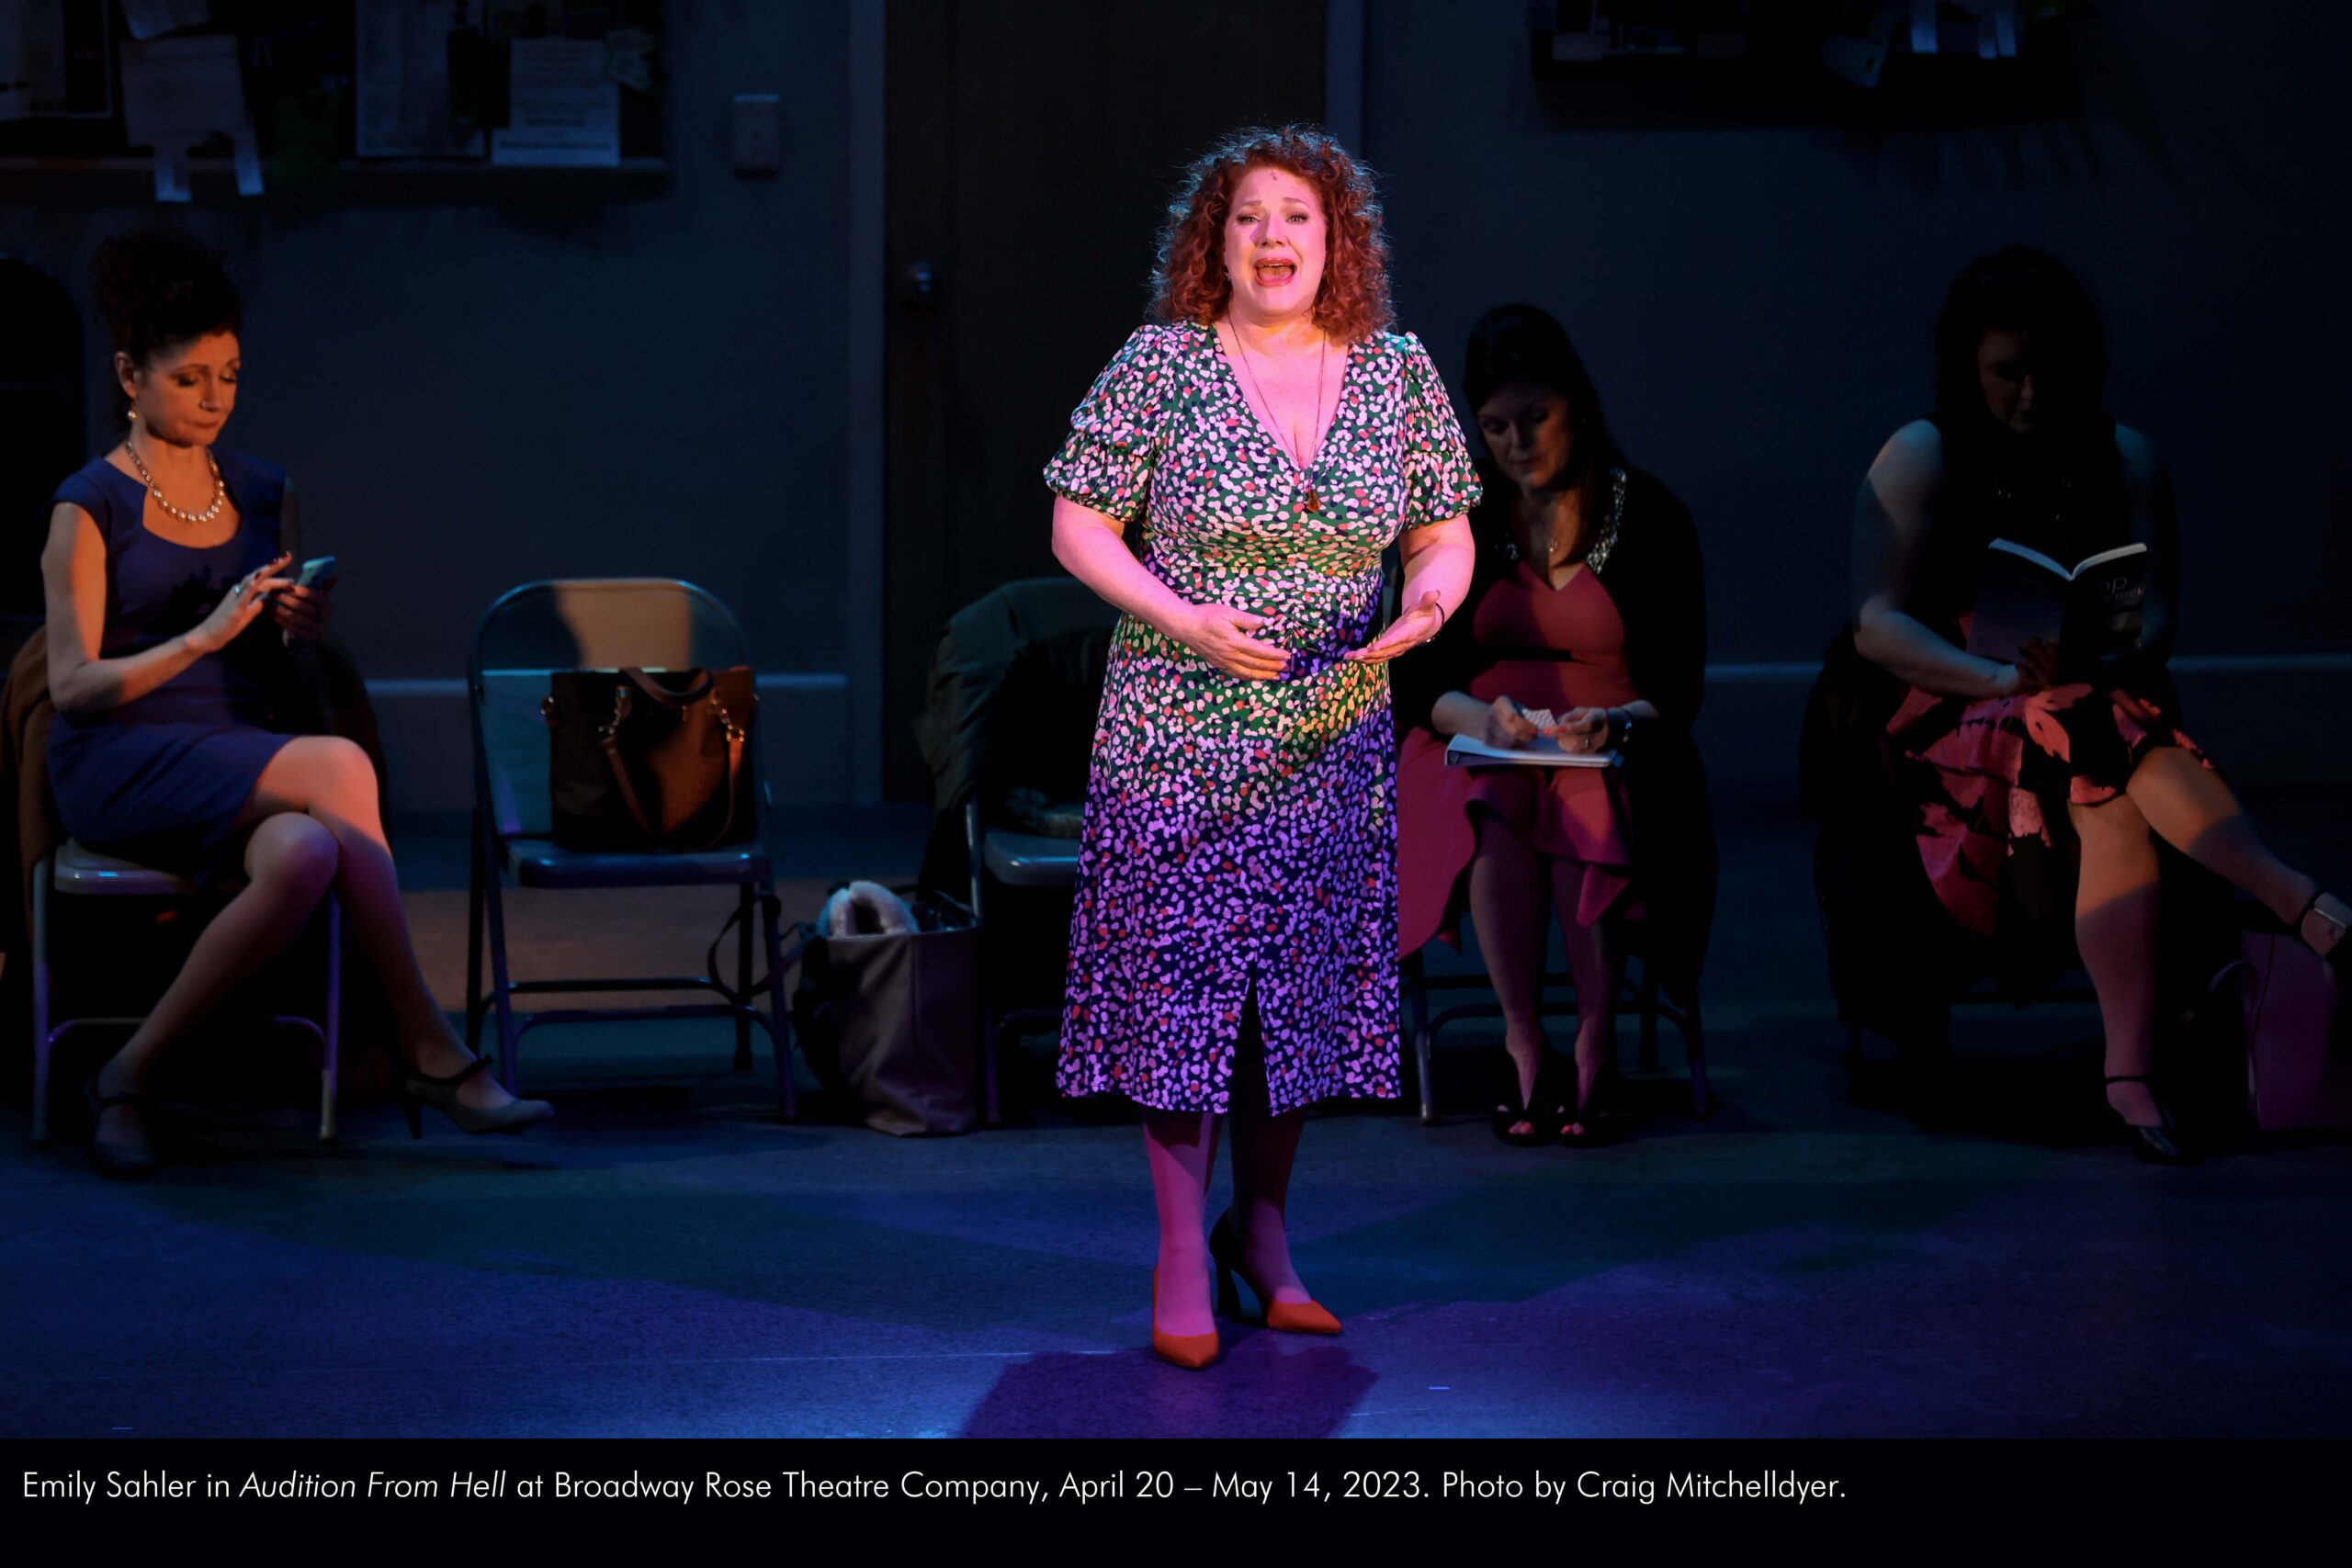 Emily Sahler in Audition From Hell at Broadway Rose Theatre Company. April 20 through May 14, 2023. Photo by Craig Mitchelldyer